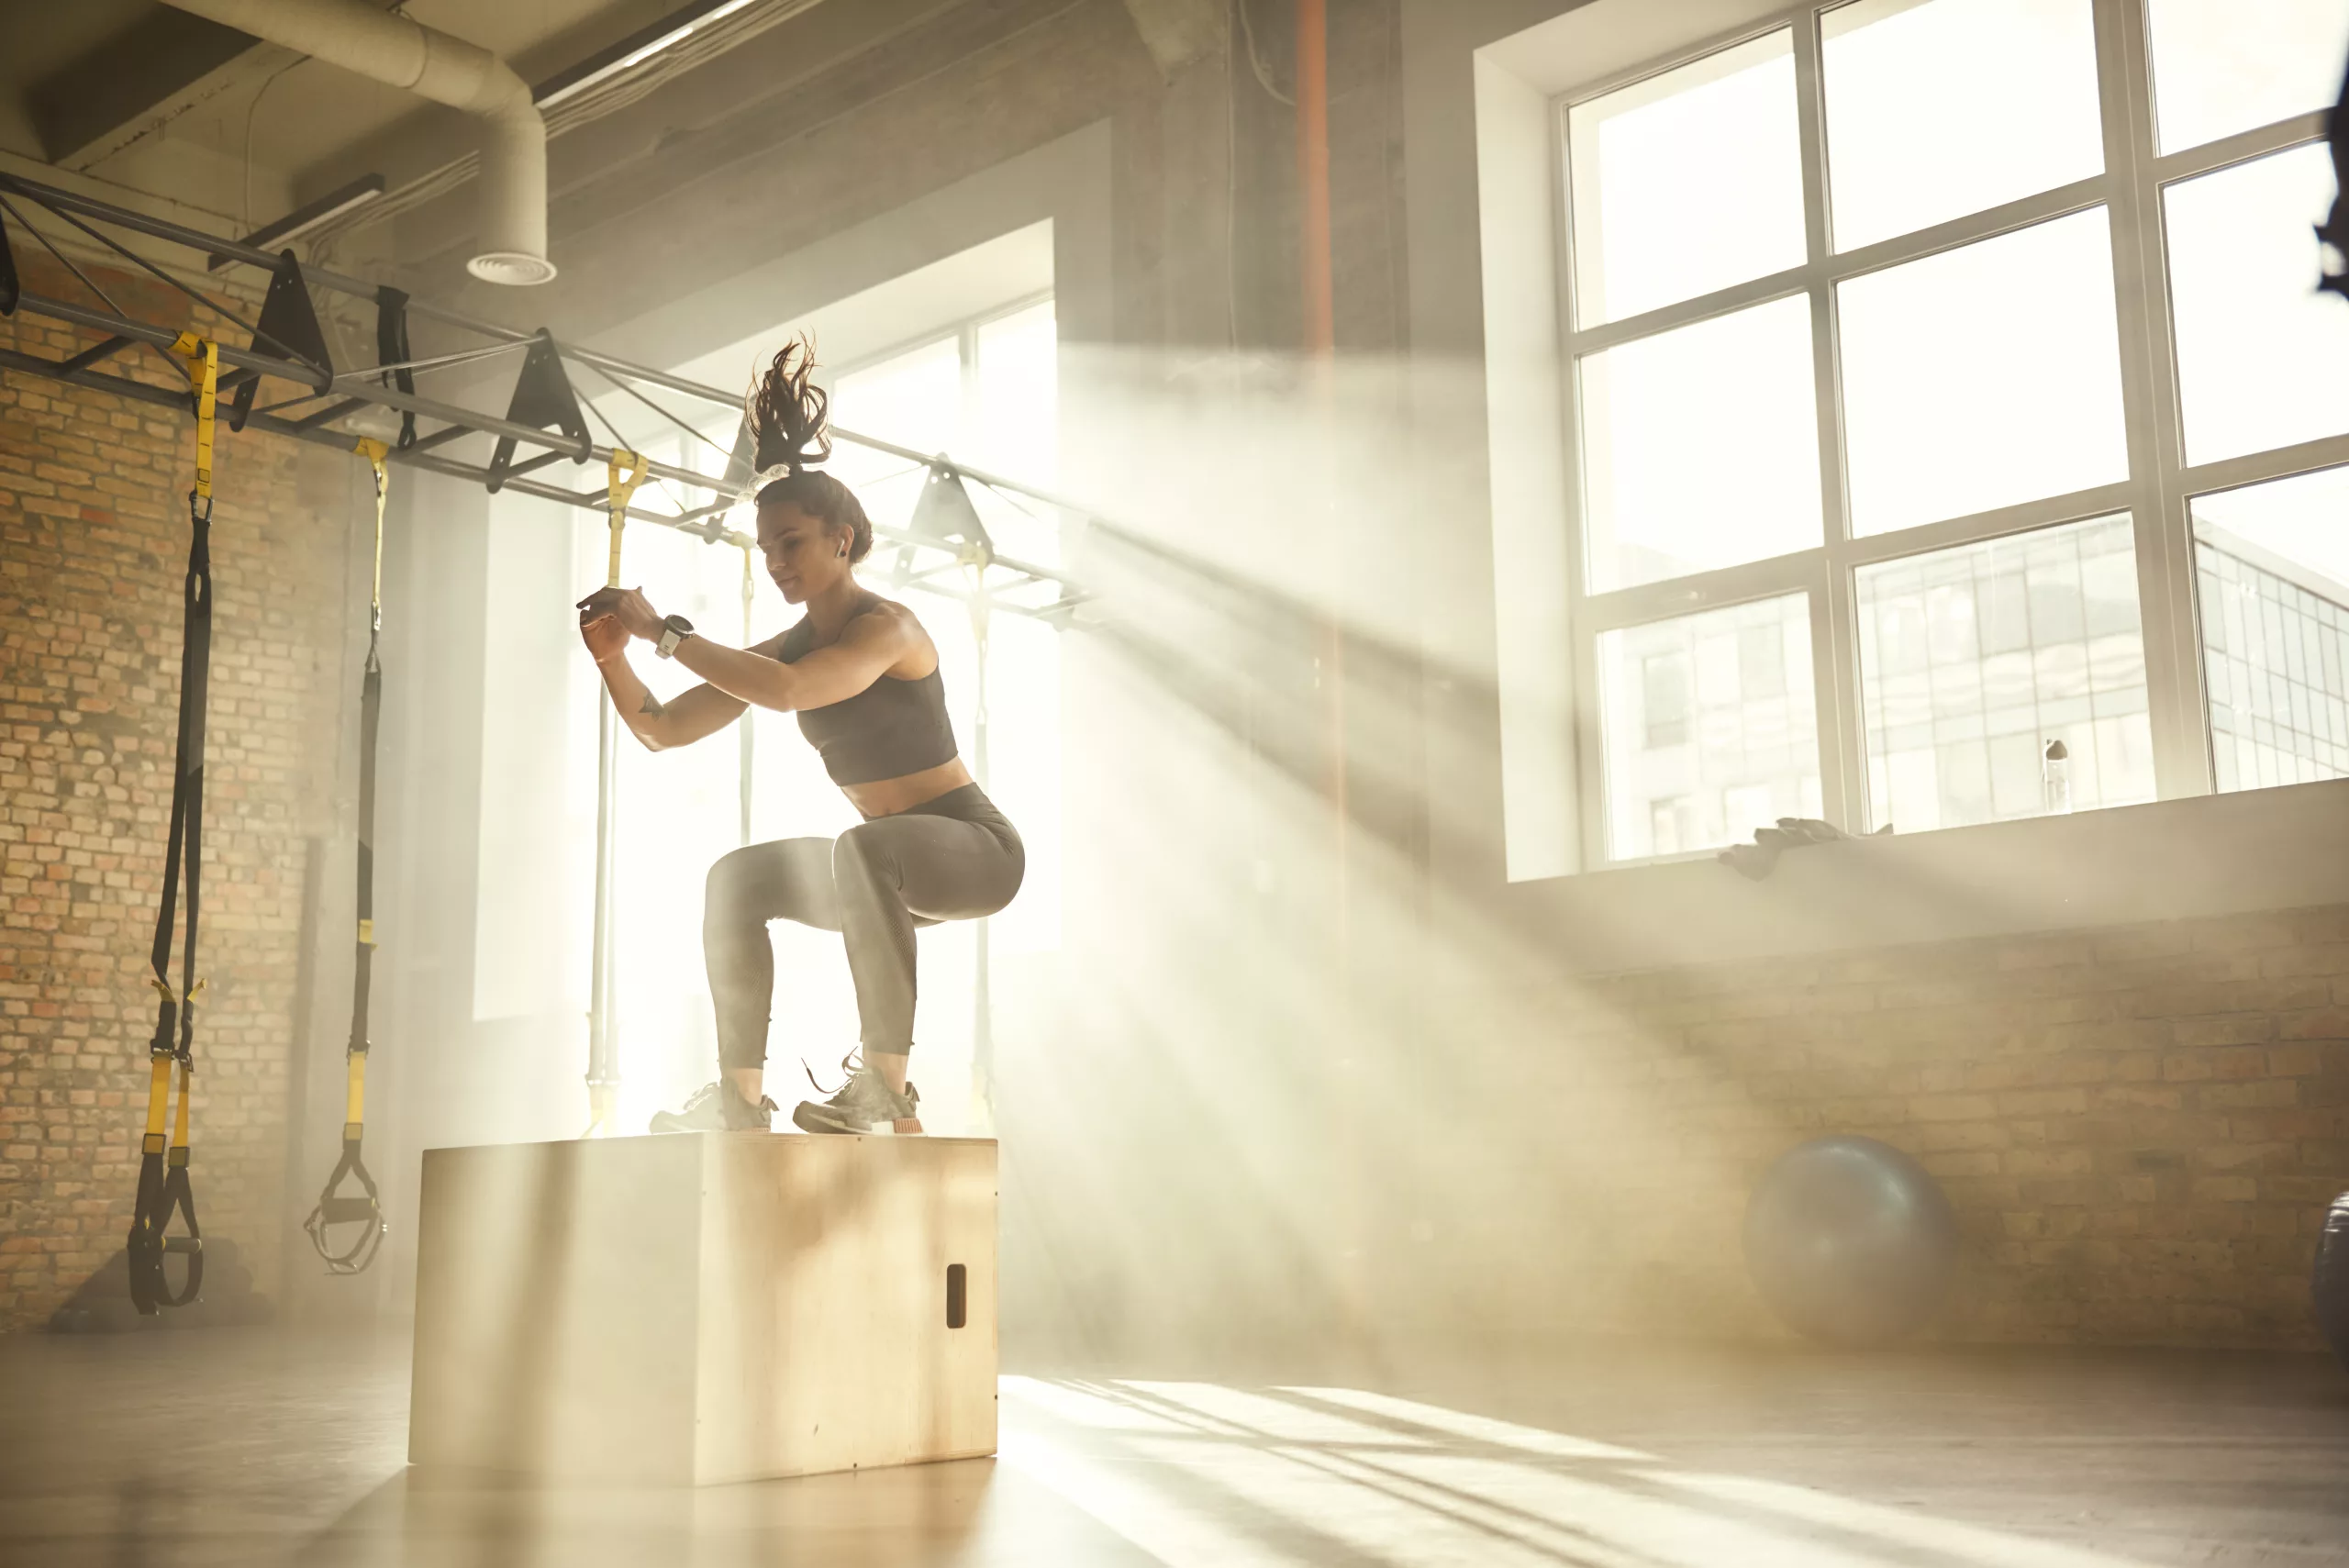 Side view of athletic woman in sportswear doing a box jump in gym with sun setting in window behind her